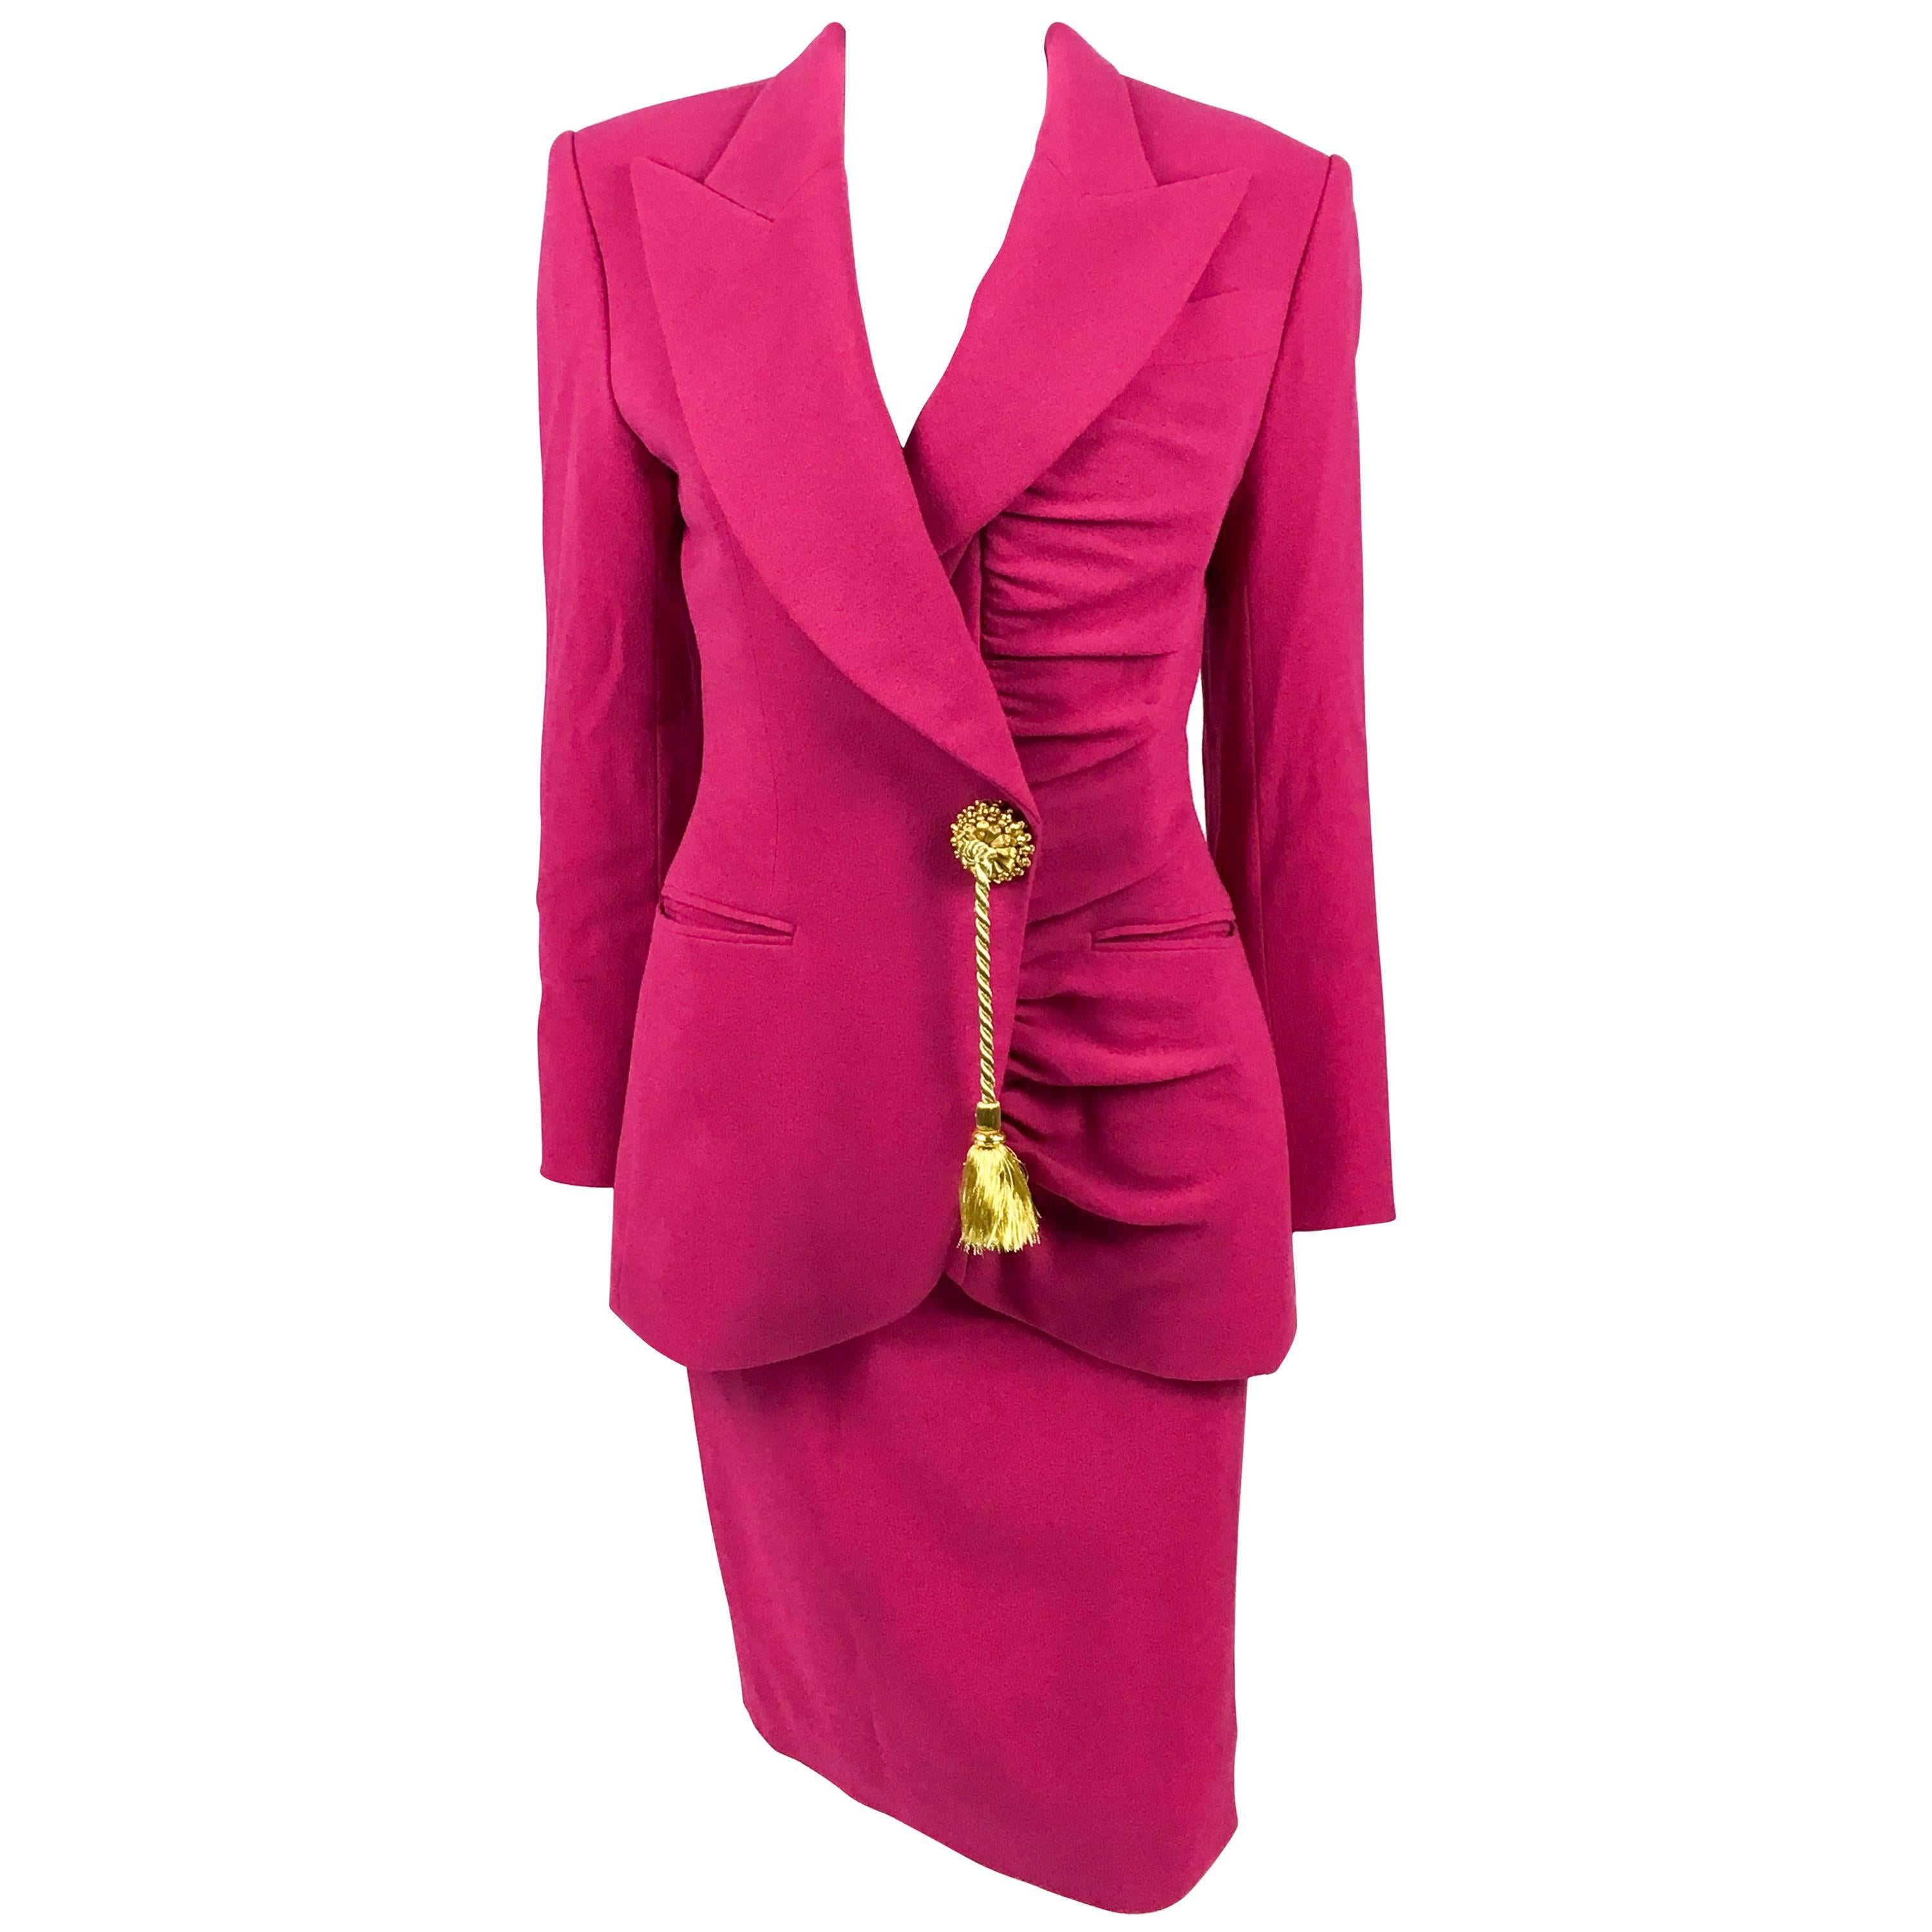 1980s Dior Numbered Demi-Couture Hot Pink Suit With Golden Tassel  For Sale